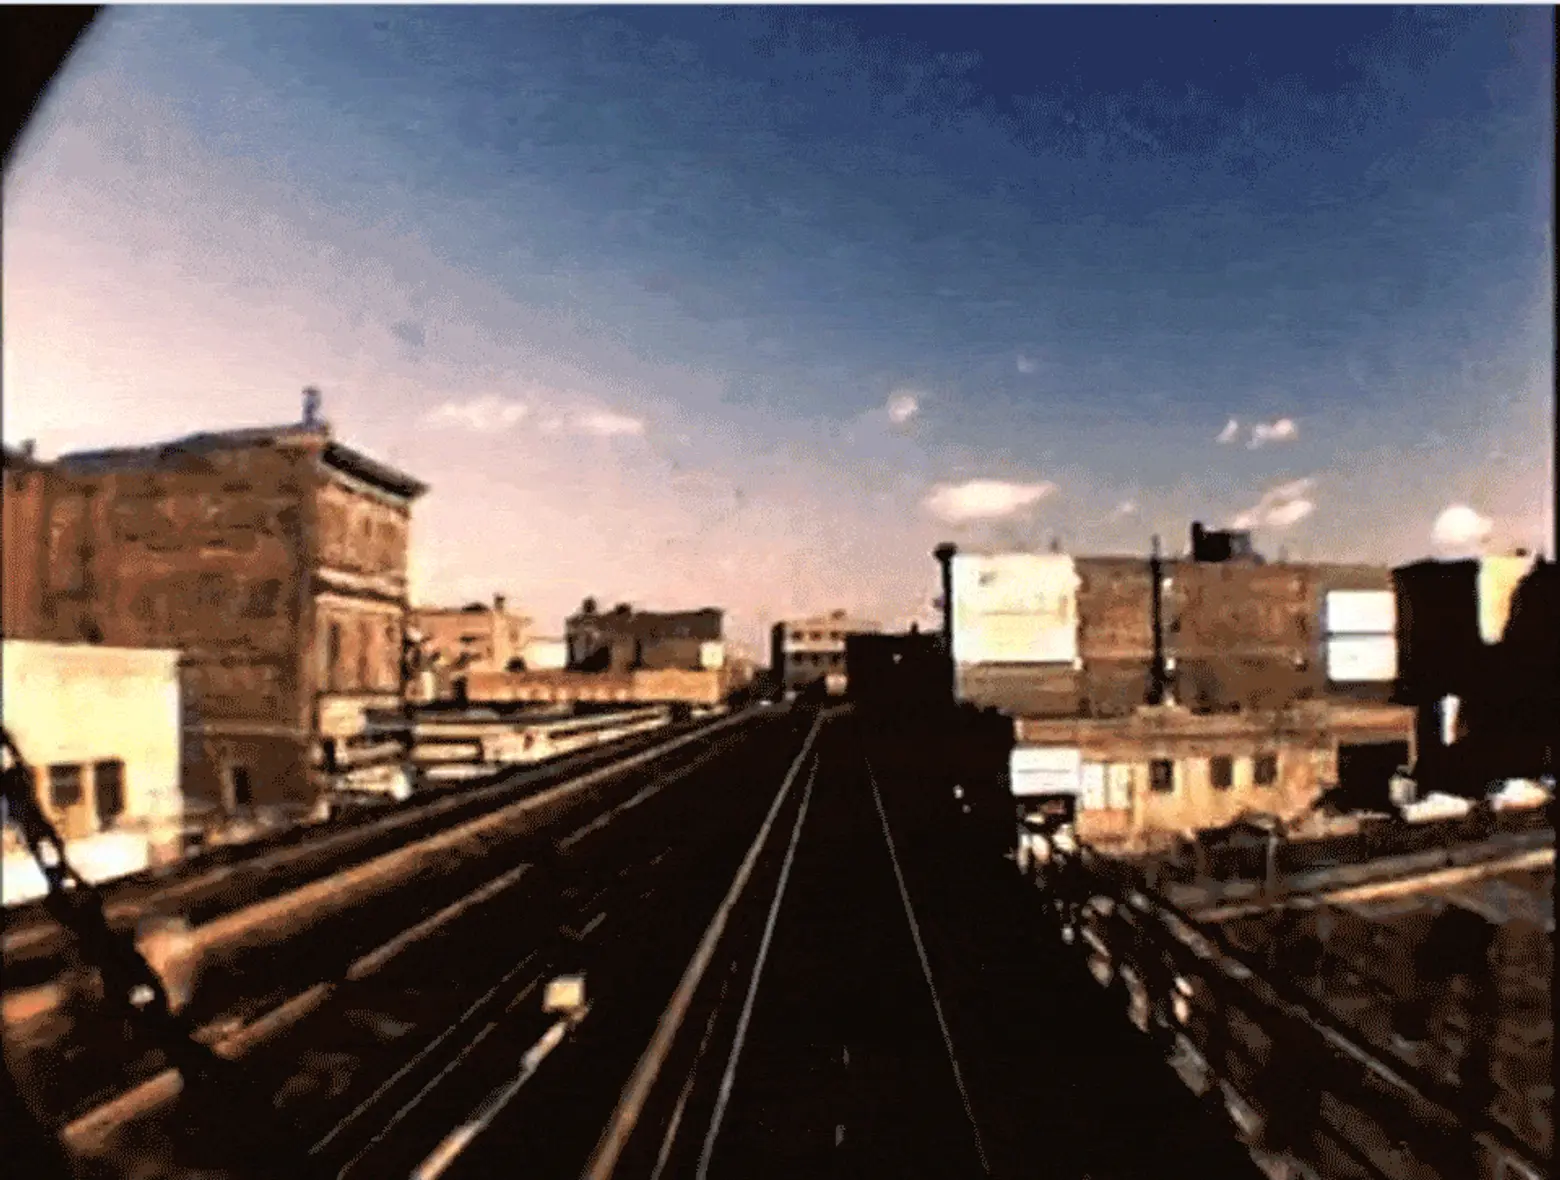 VIDEOS: Watch footage from the Third Avenue El train’s last days in 1955